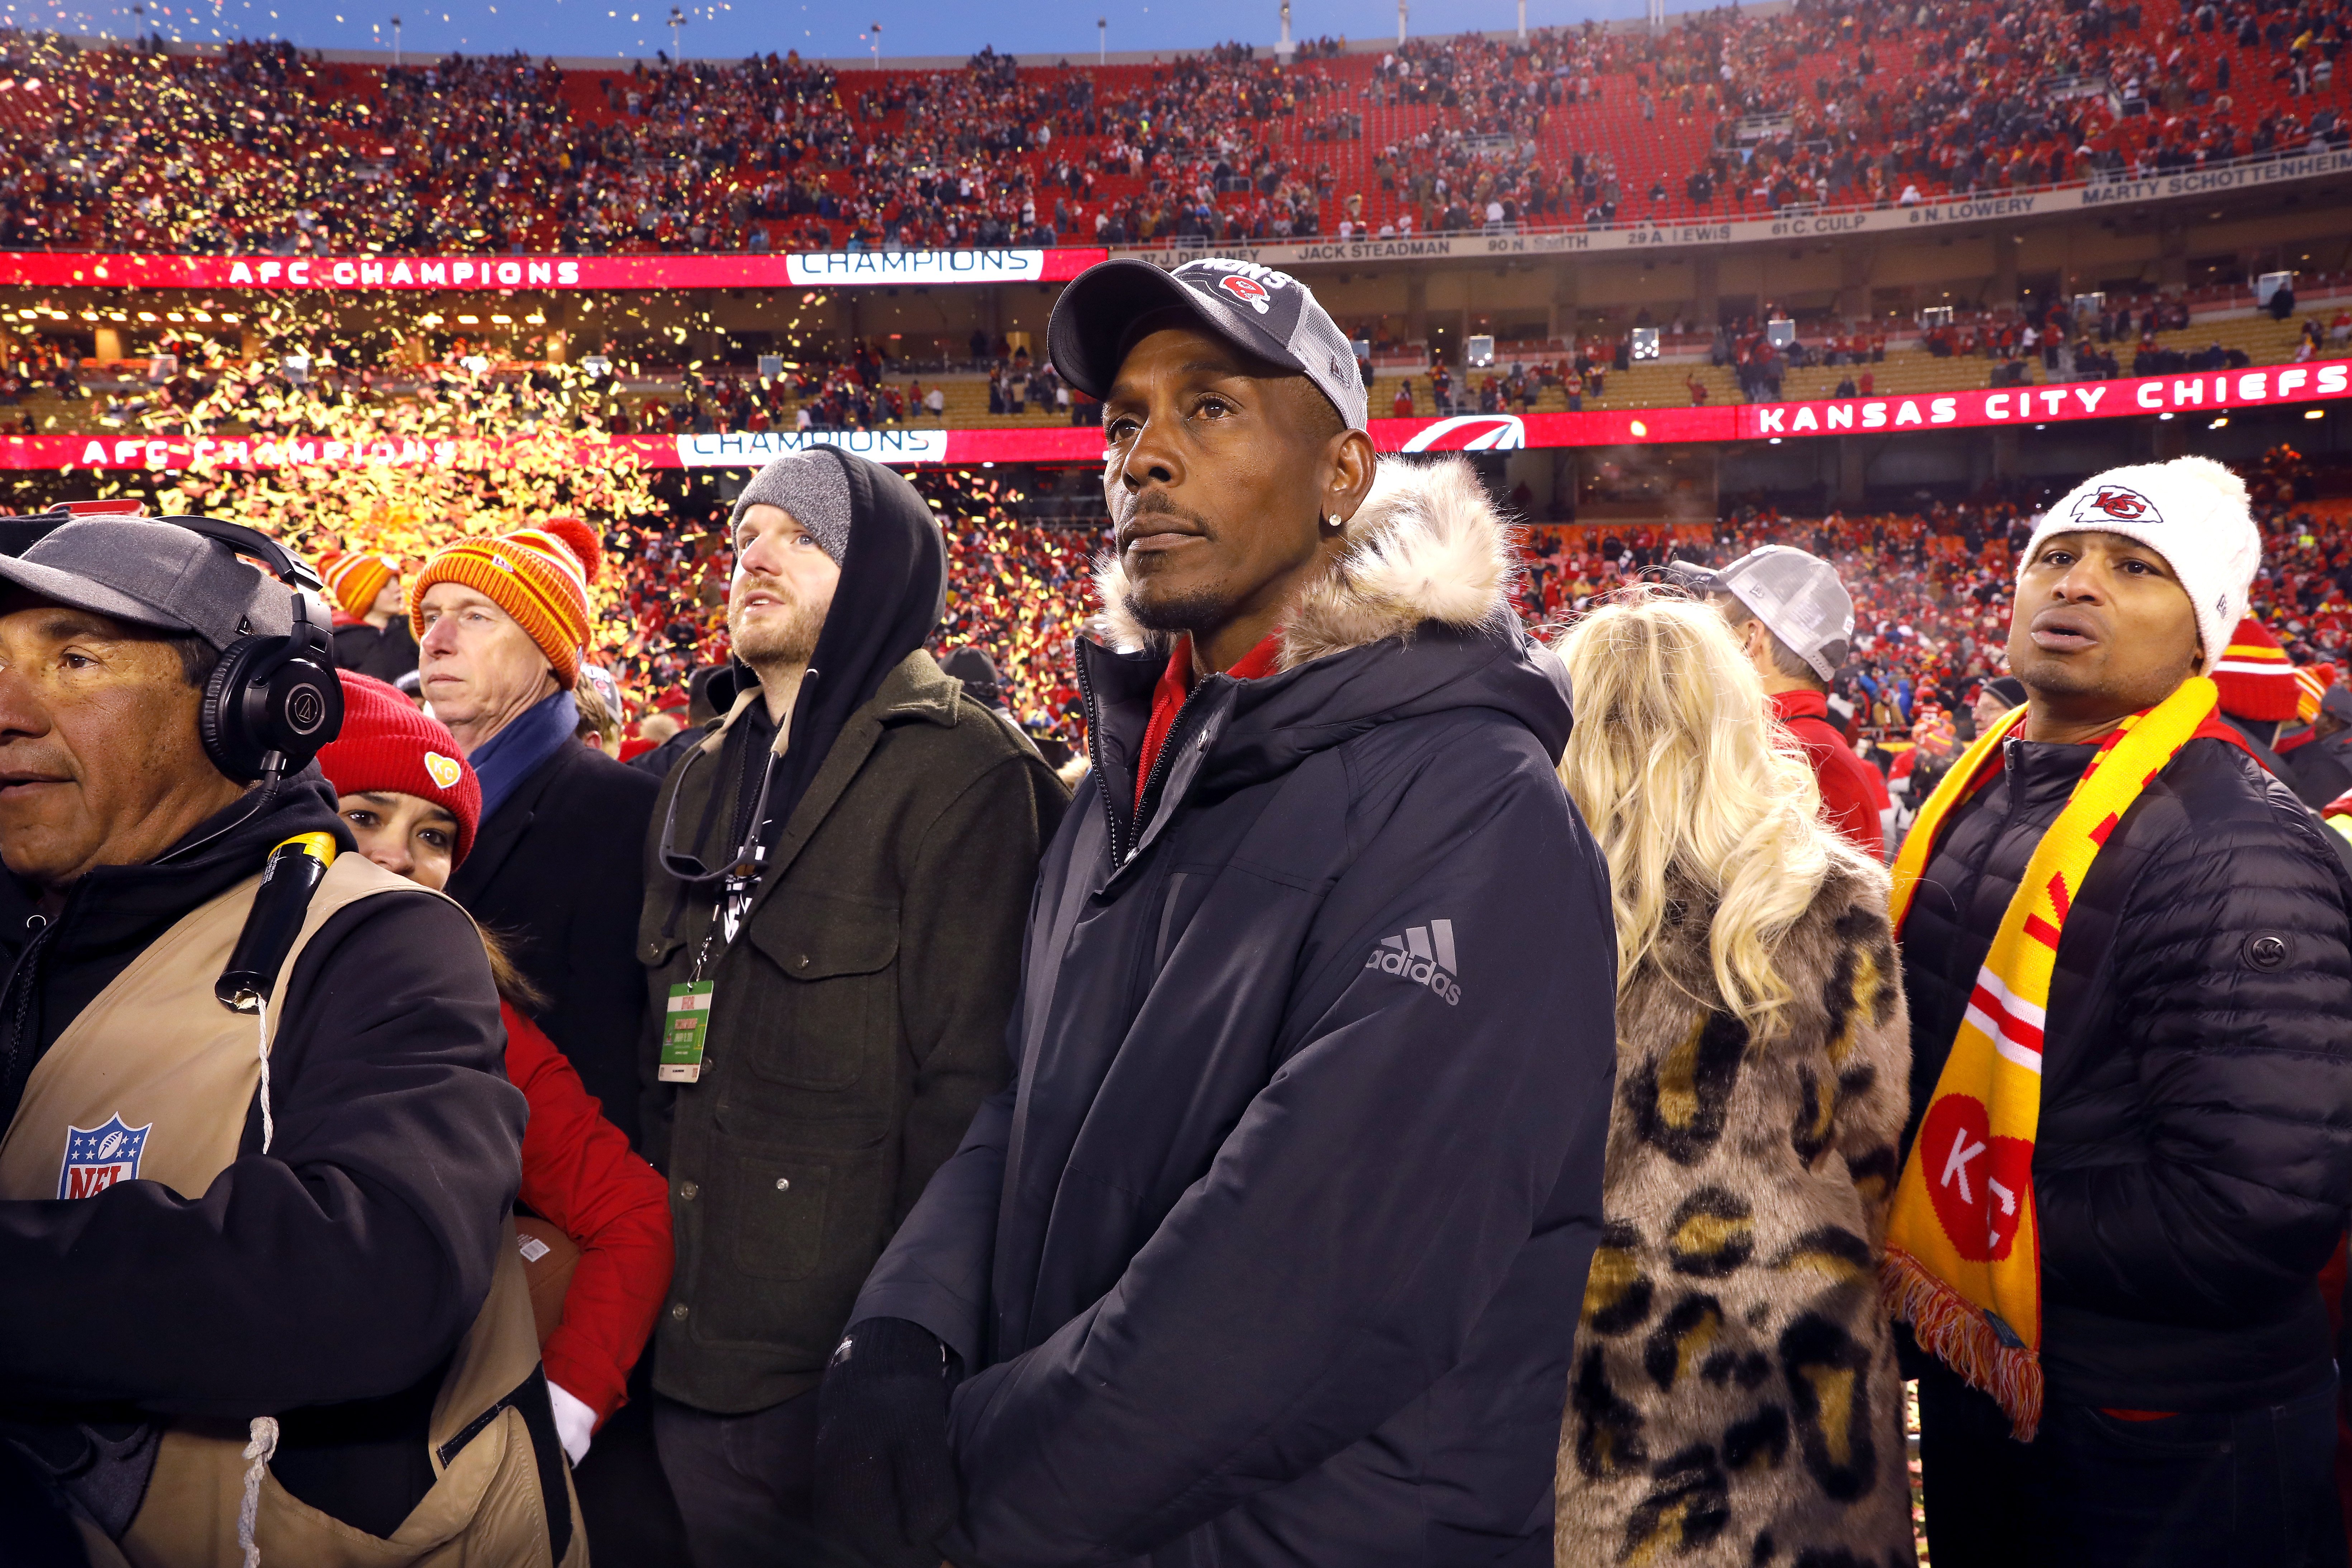 Pat Mahomes at the Kansas City Chiefs vs Tennessee Titans game at Arrowhead Stadium on January 19, 2020 in Kansas City, Missouri | Source: Getty Images